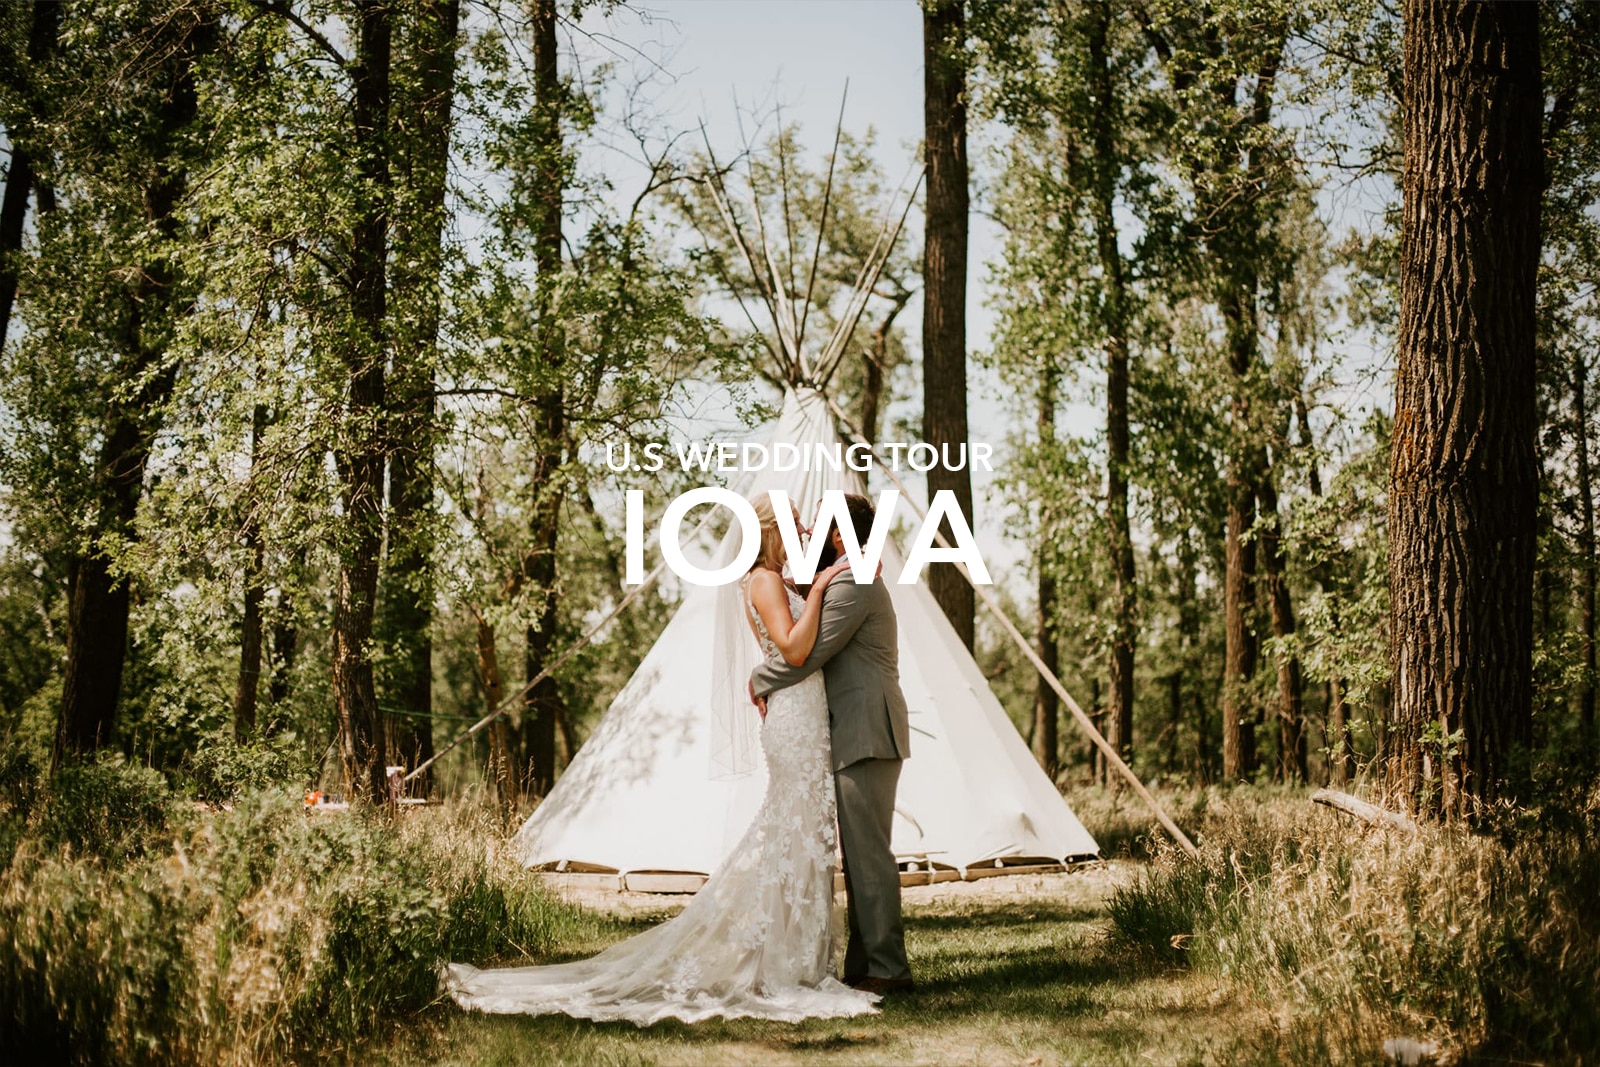 Wedding couple kissing and a tent in the background